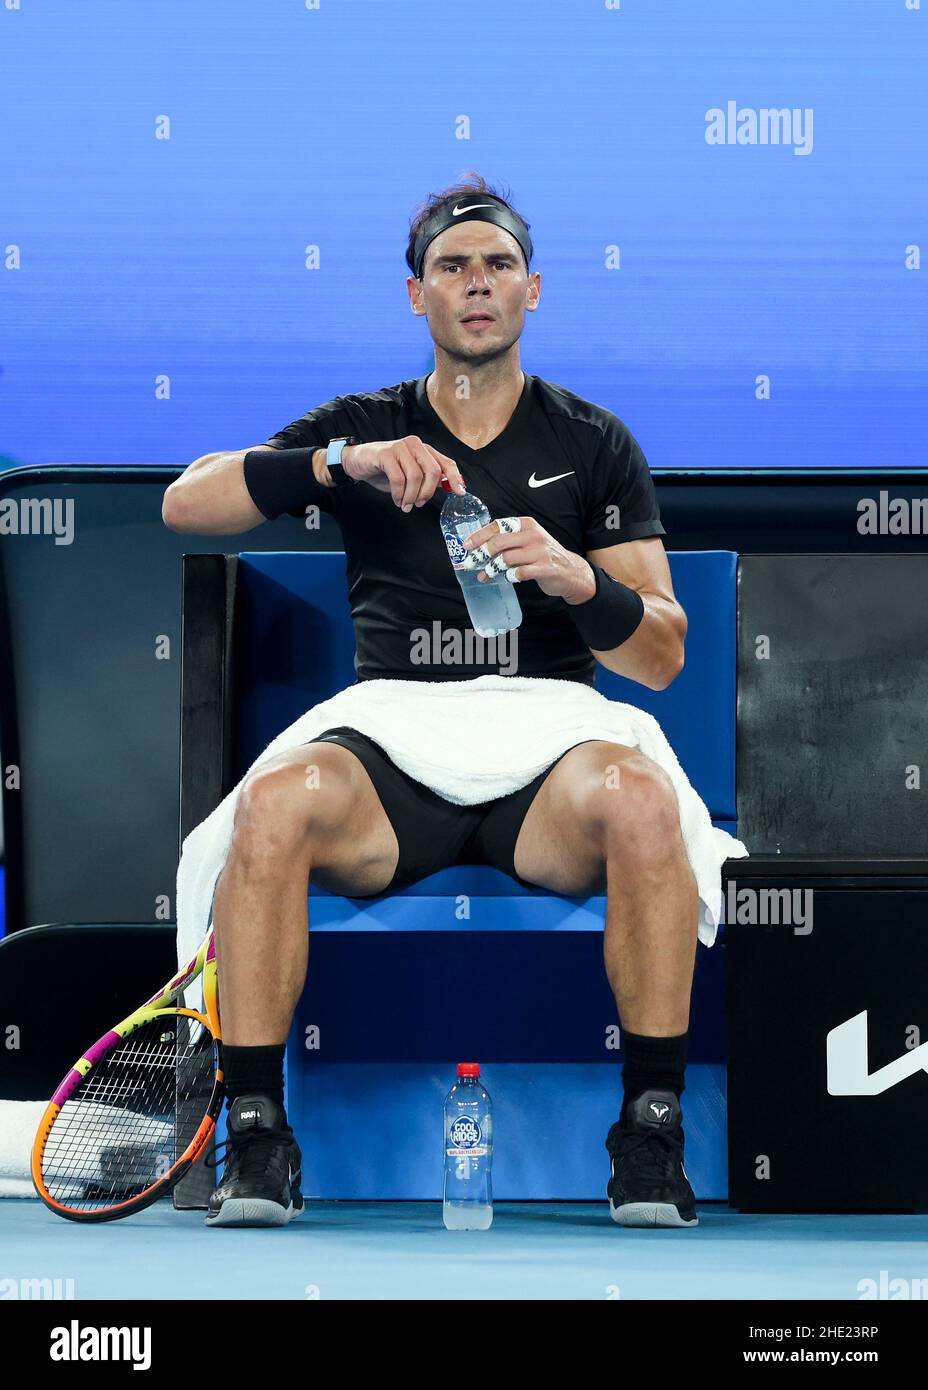 Melbourne, Australia. 8th. Jan., 2022. Spanish tennis player Rafael Nadal  in action during the Melbourne Summer Set tournament at Melbourne Park on  Saturdday 08 January 2022. © Juergen Hasenkopf / Alamy Live News Stock  Photo - Alamy